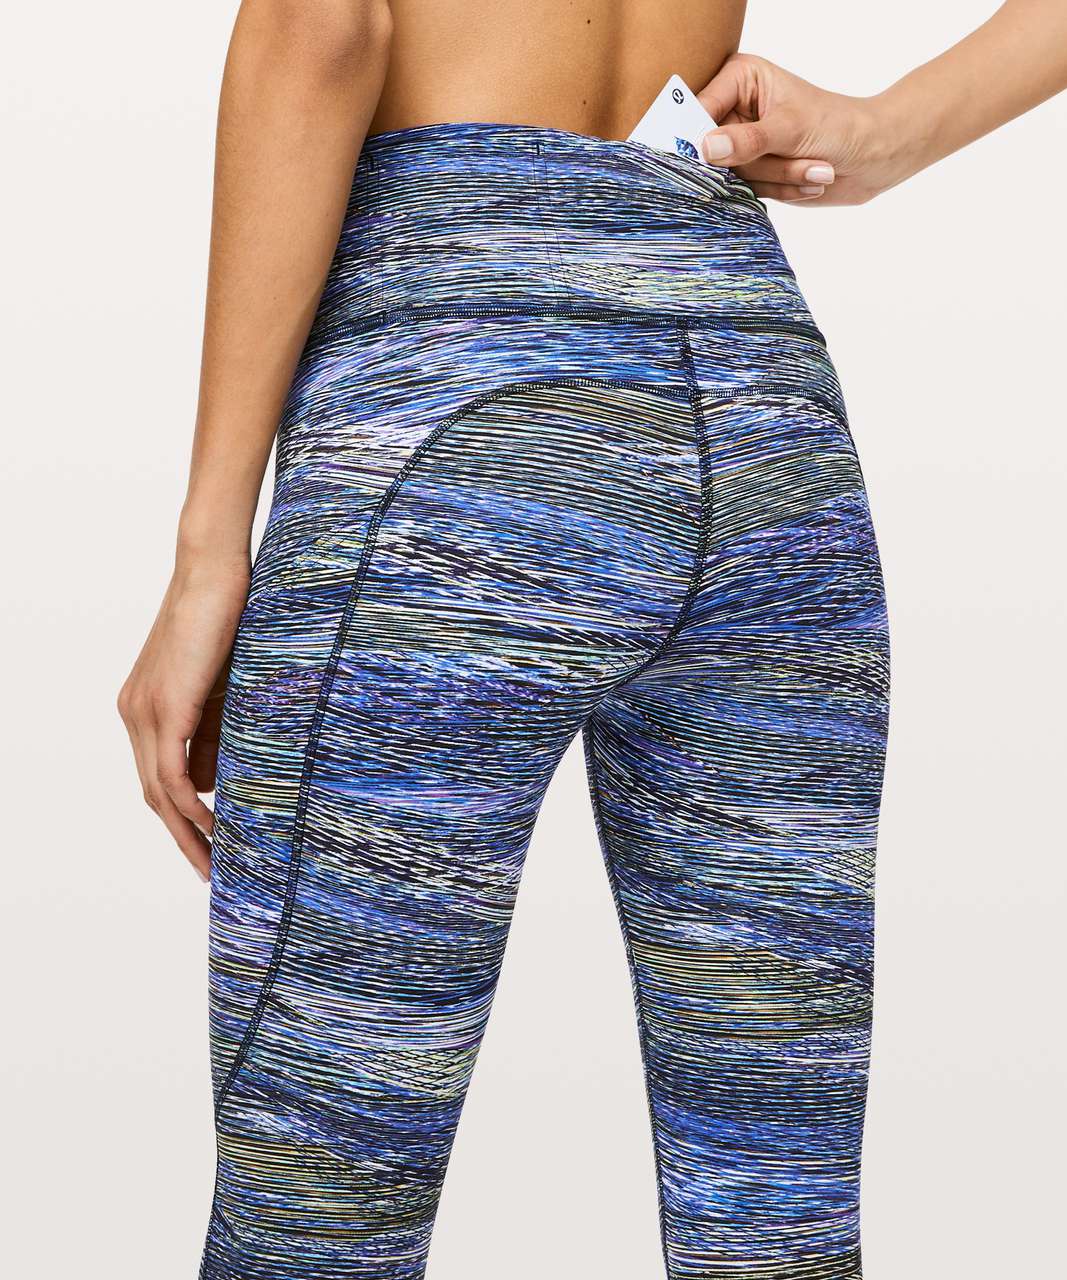 Lululemon Fast and Free Tight II 25" *Non-Reflective Nulux - Interconnect Blue Multi